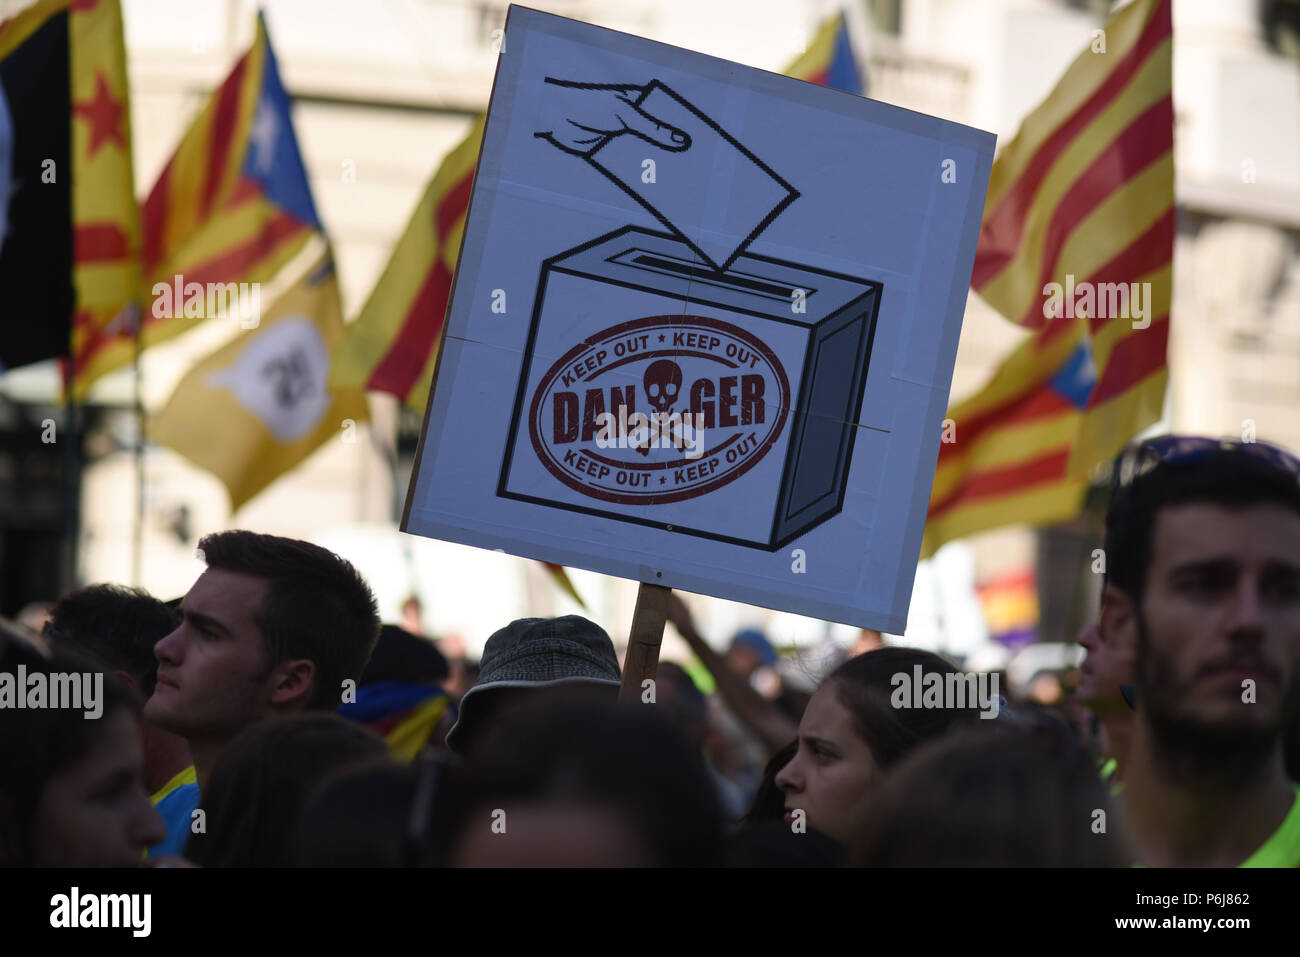 September 11, 2017 - Barcelona, Spain: Hundreds of thousands of Catalans gather in Barcelona for Catalonia's national day, known as the 'Diada', as they call for independence less than three weeks before the region is due to hold a vote on whether to break away from Spain. Independentists marched in a festive atmosphere with banners calling on the Spanish government to respect their 'democratic will' after tensions grew with Madrid over the legality of this secession vote. Manifestation de masse lors de la Diada 2017, quelques semaines avant le referendum controverse sur l'independance de la C Stock Photo